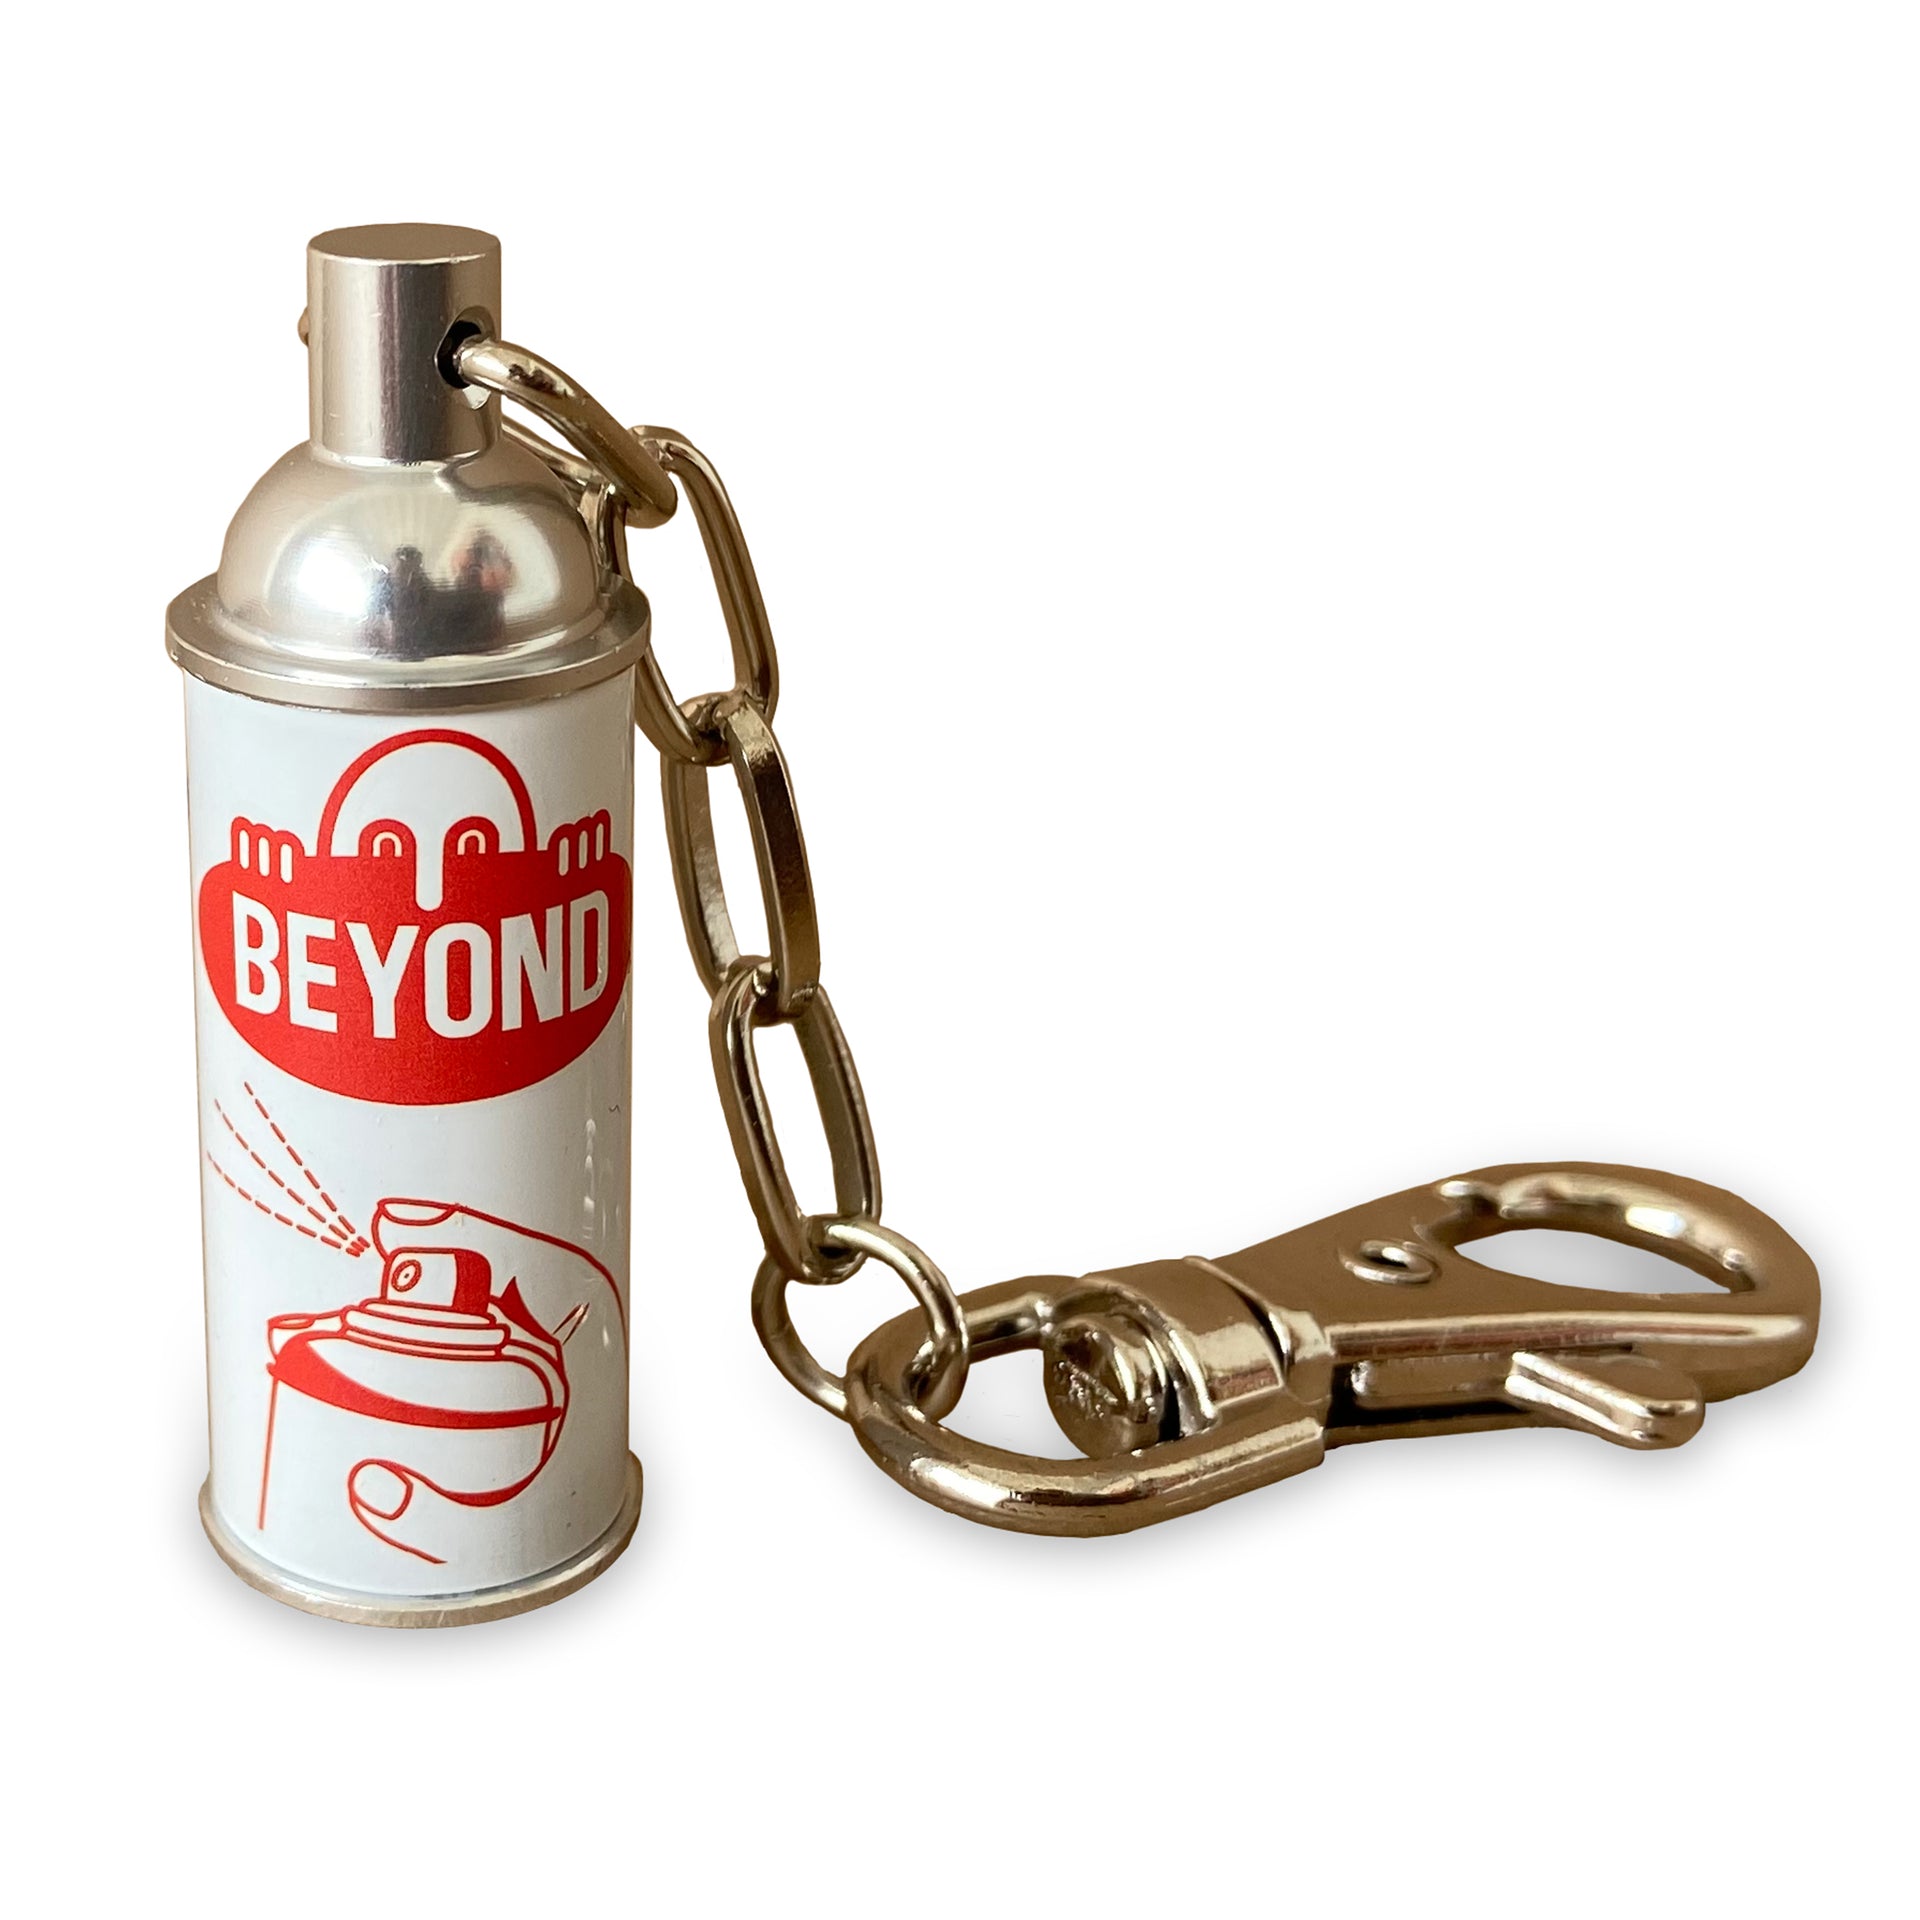 BEYOND THE STREETS "BEYOND Spray Can" Keychain